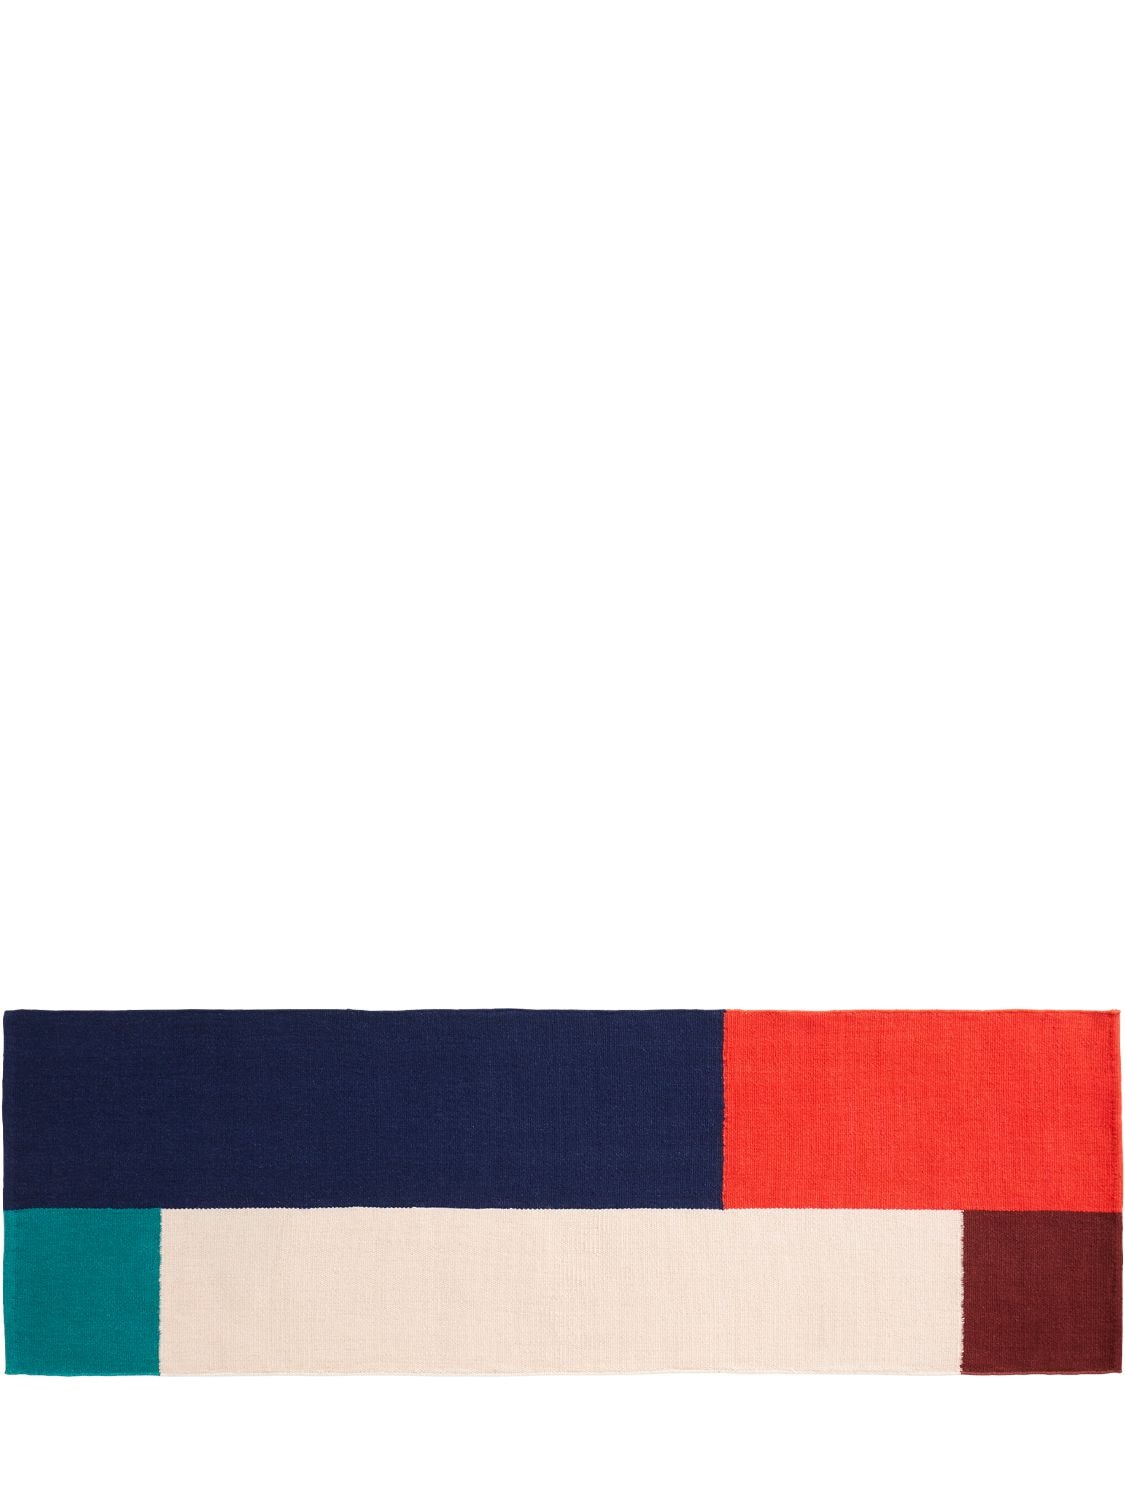 Hay Ethan Cook Flat Works Wave Rug In Multicolor